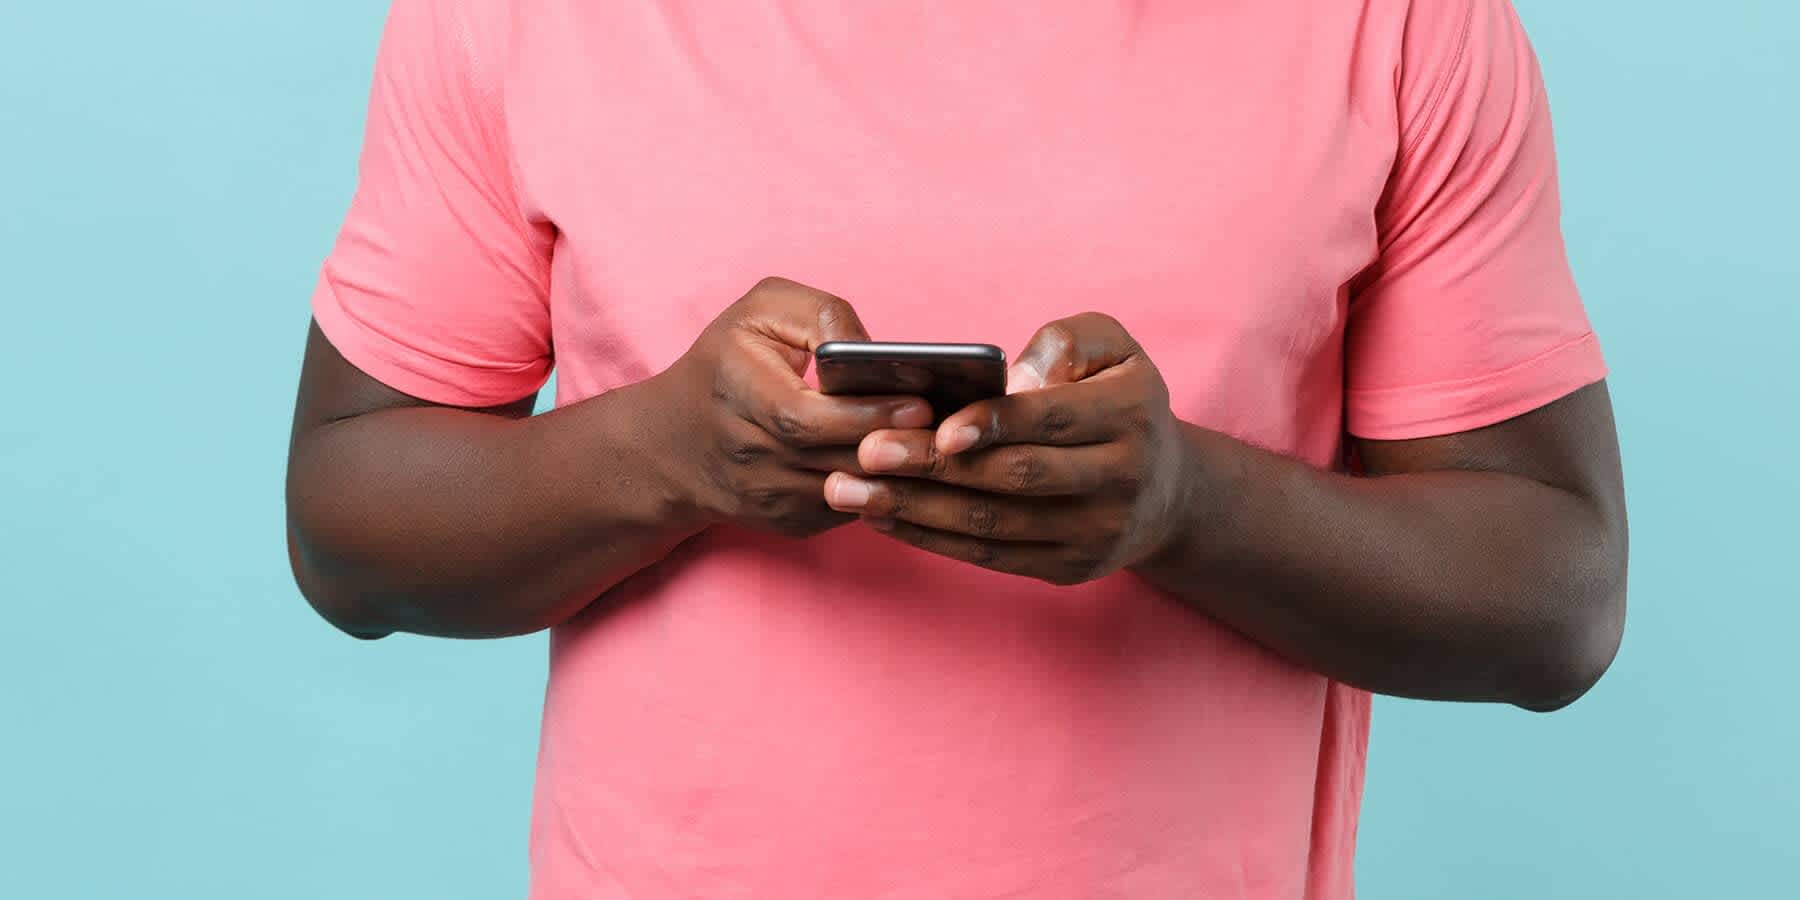 Man in pink shirt using mobile phone to look up azithromycin vs. doxycycline